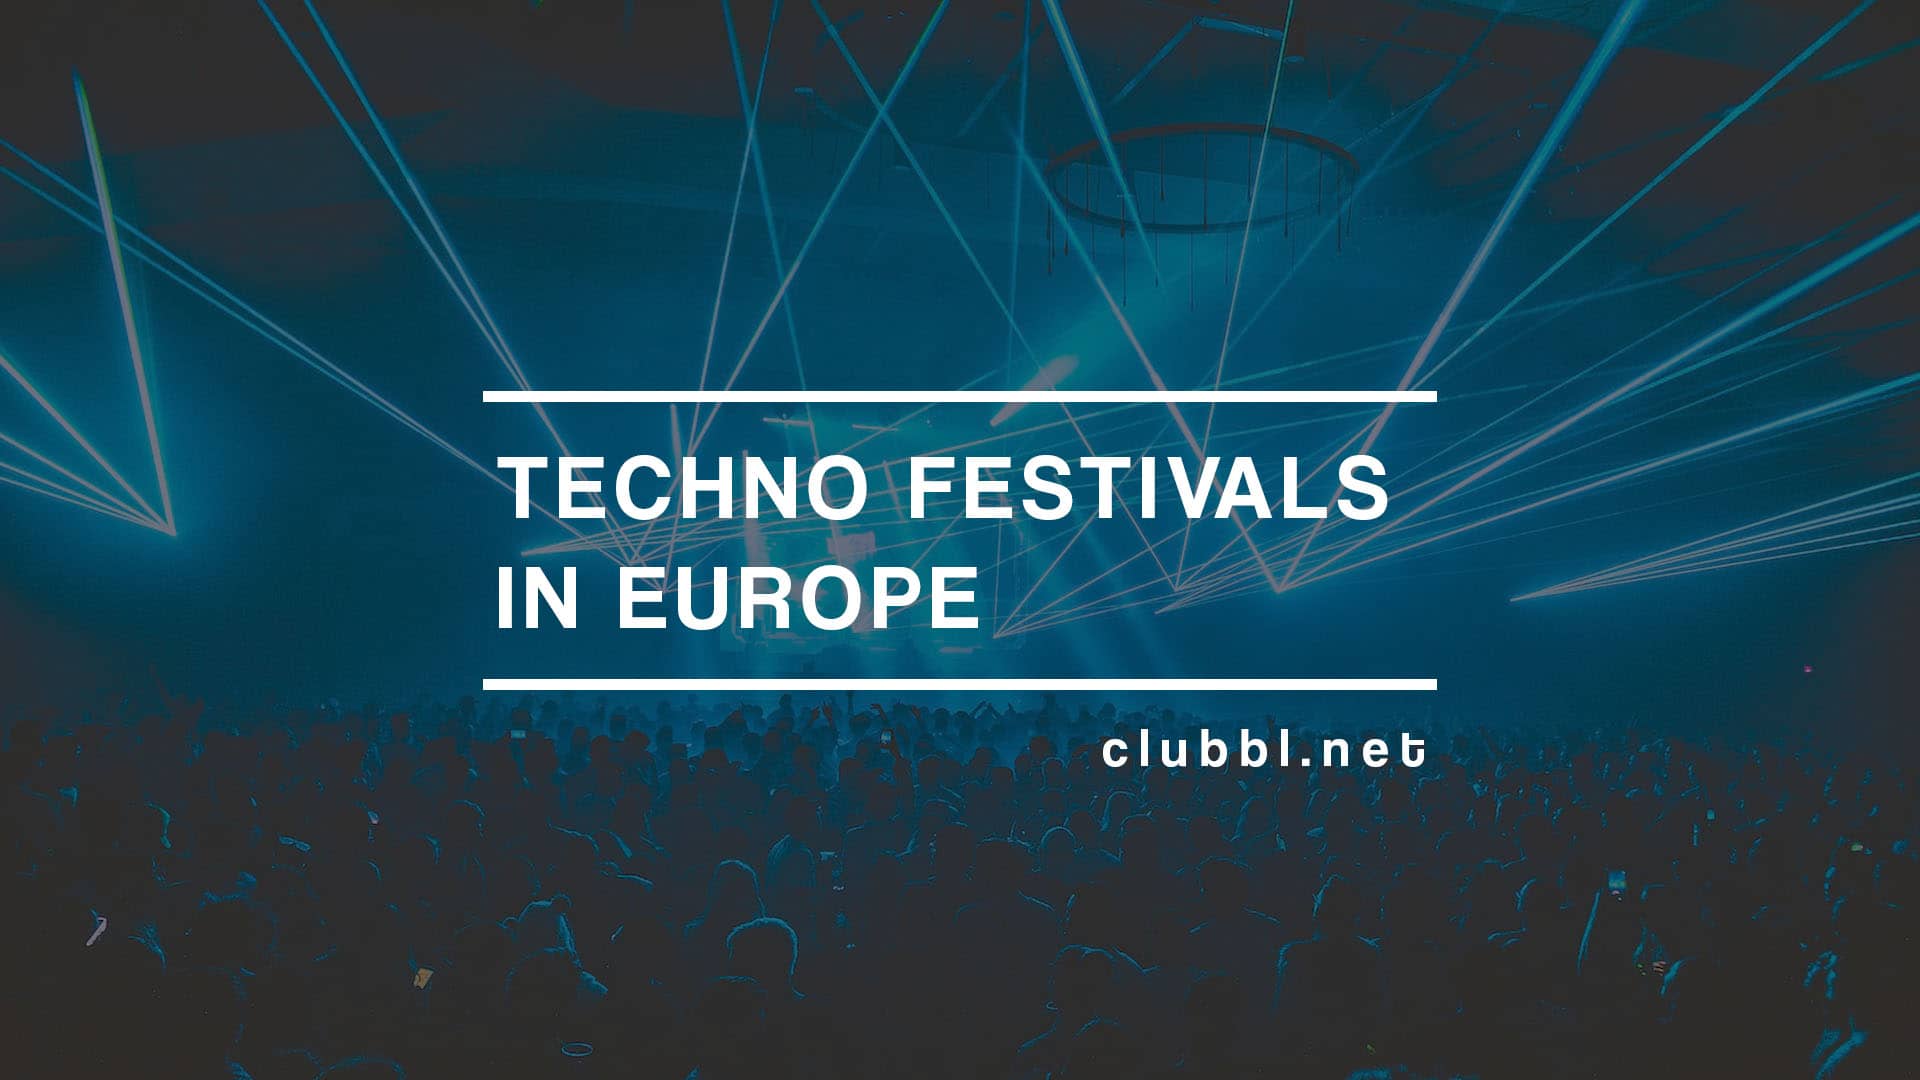 Techno festivals in Europe 2023 - List of different techno festivals in Europe